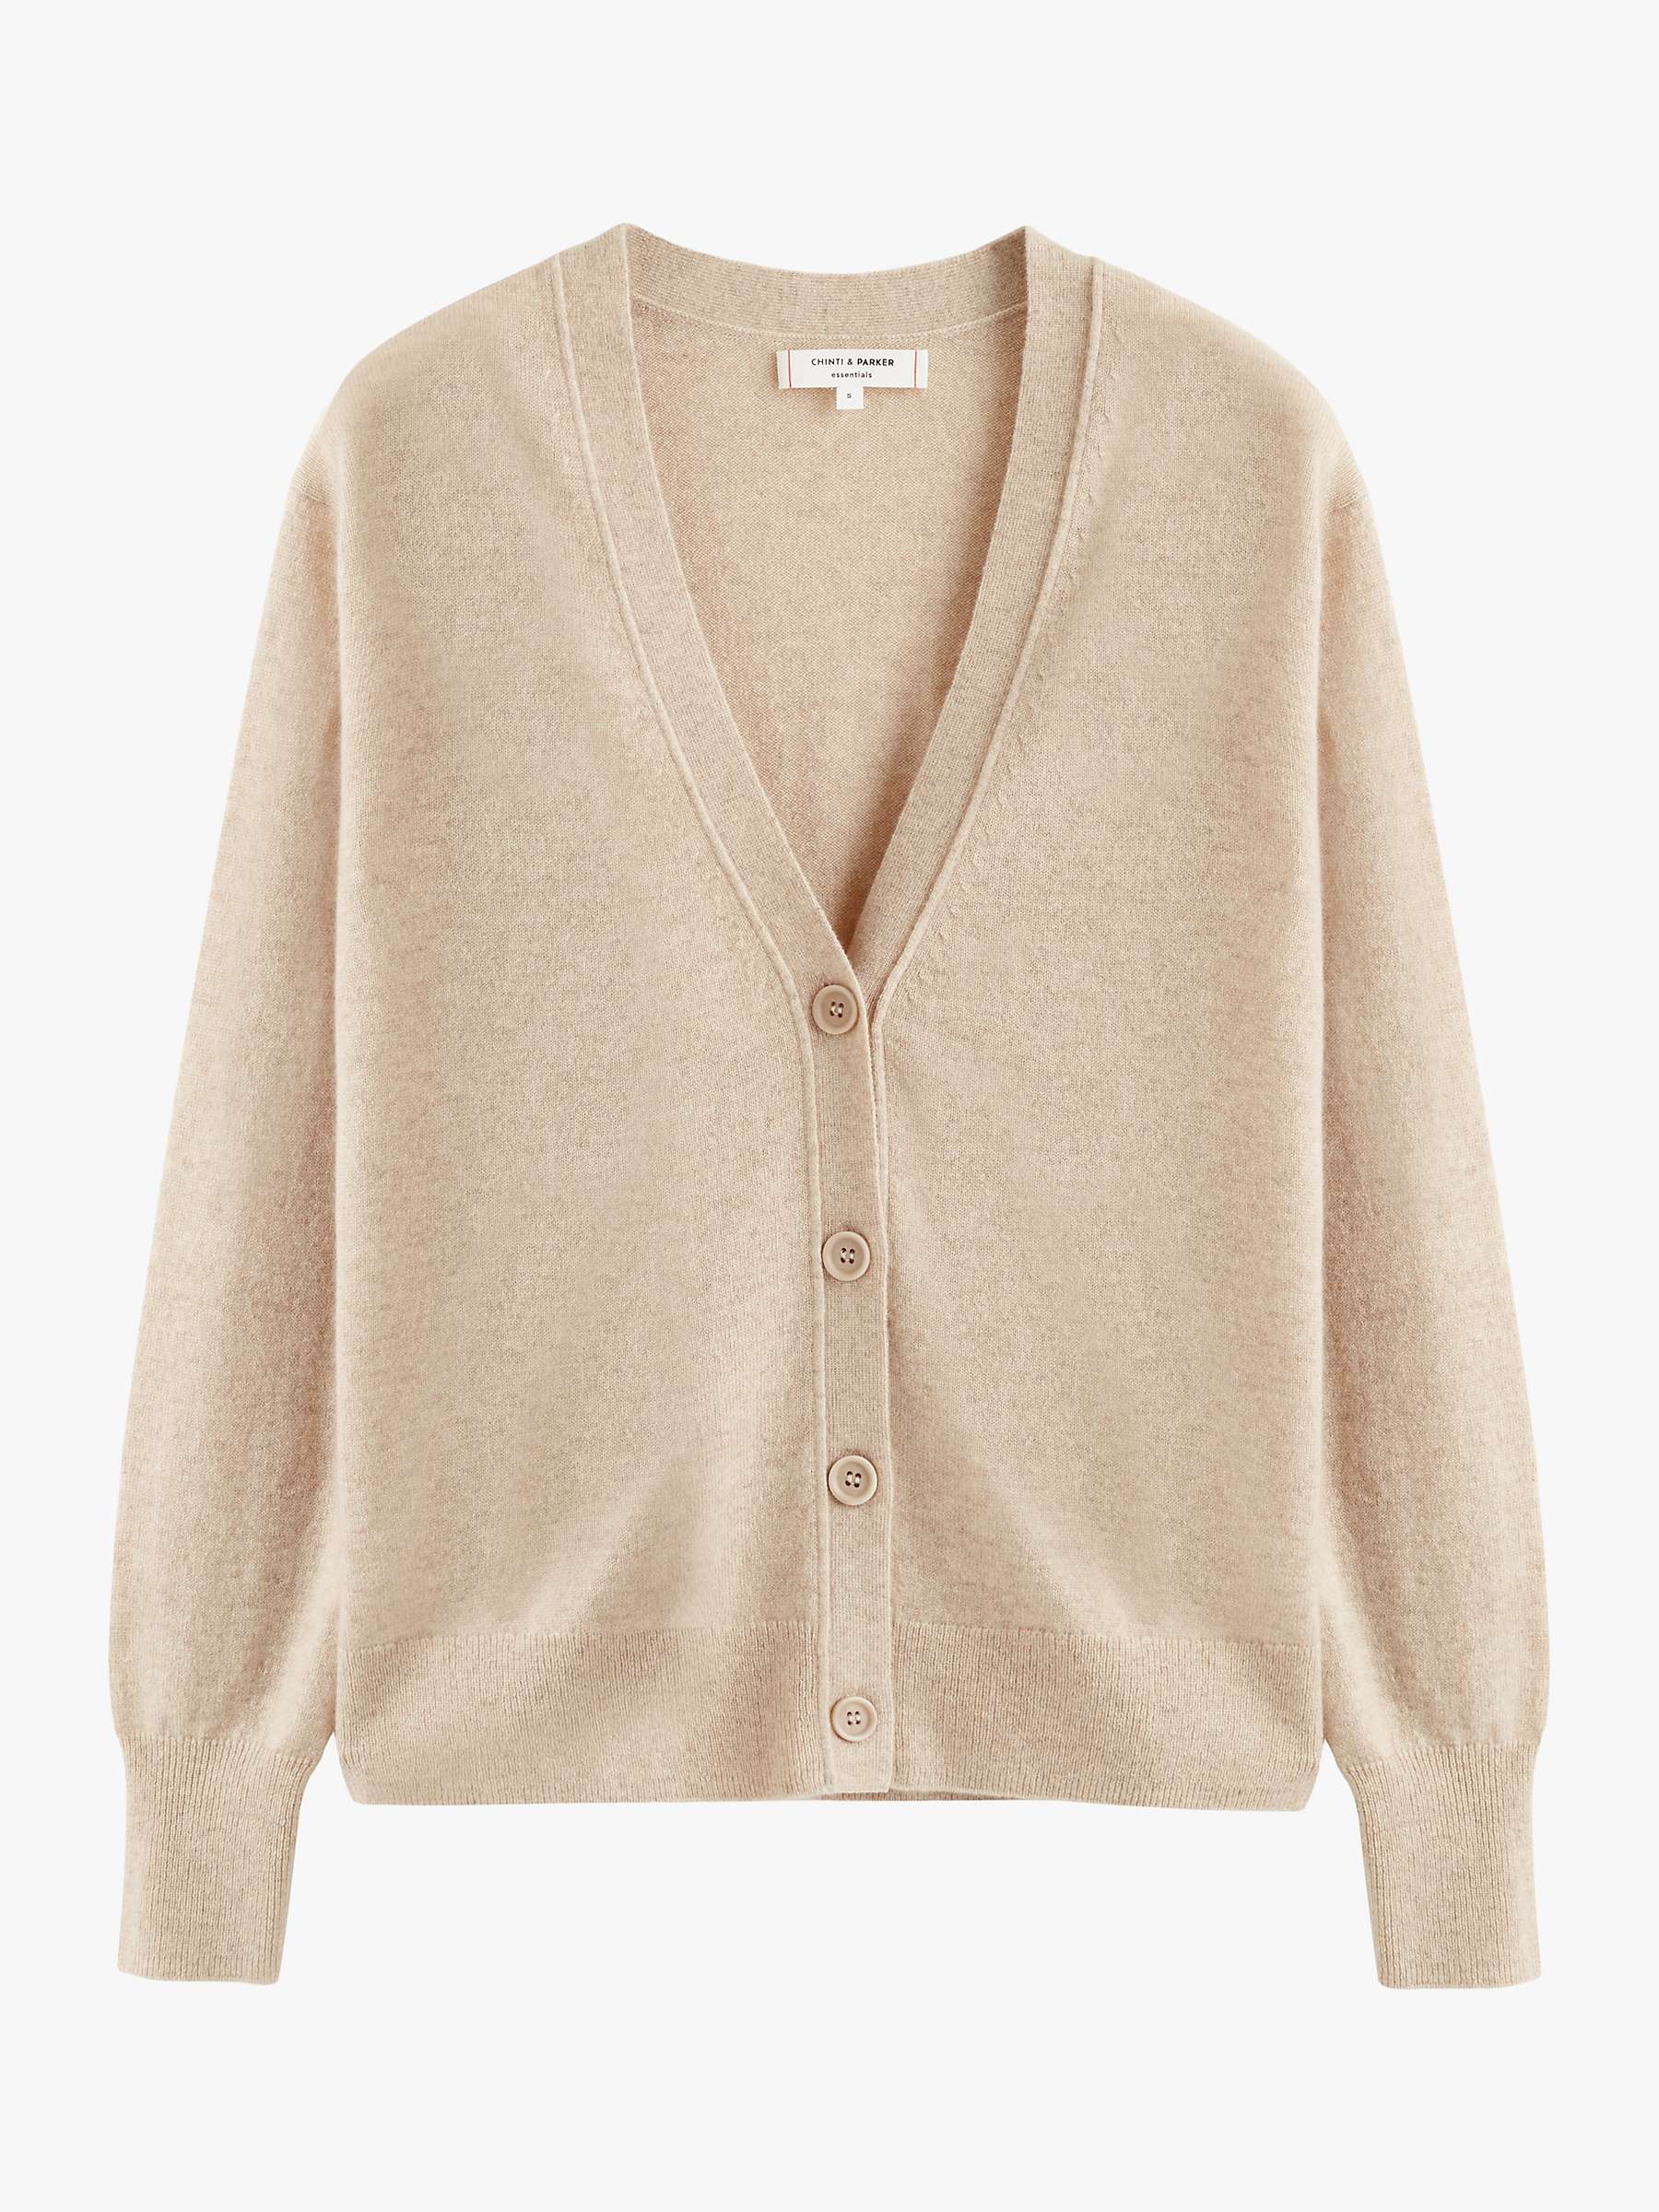 Buy Chinti & Parker Cashmere Cardigan Online at johnlewis.com